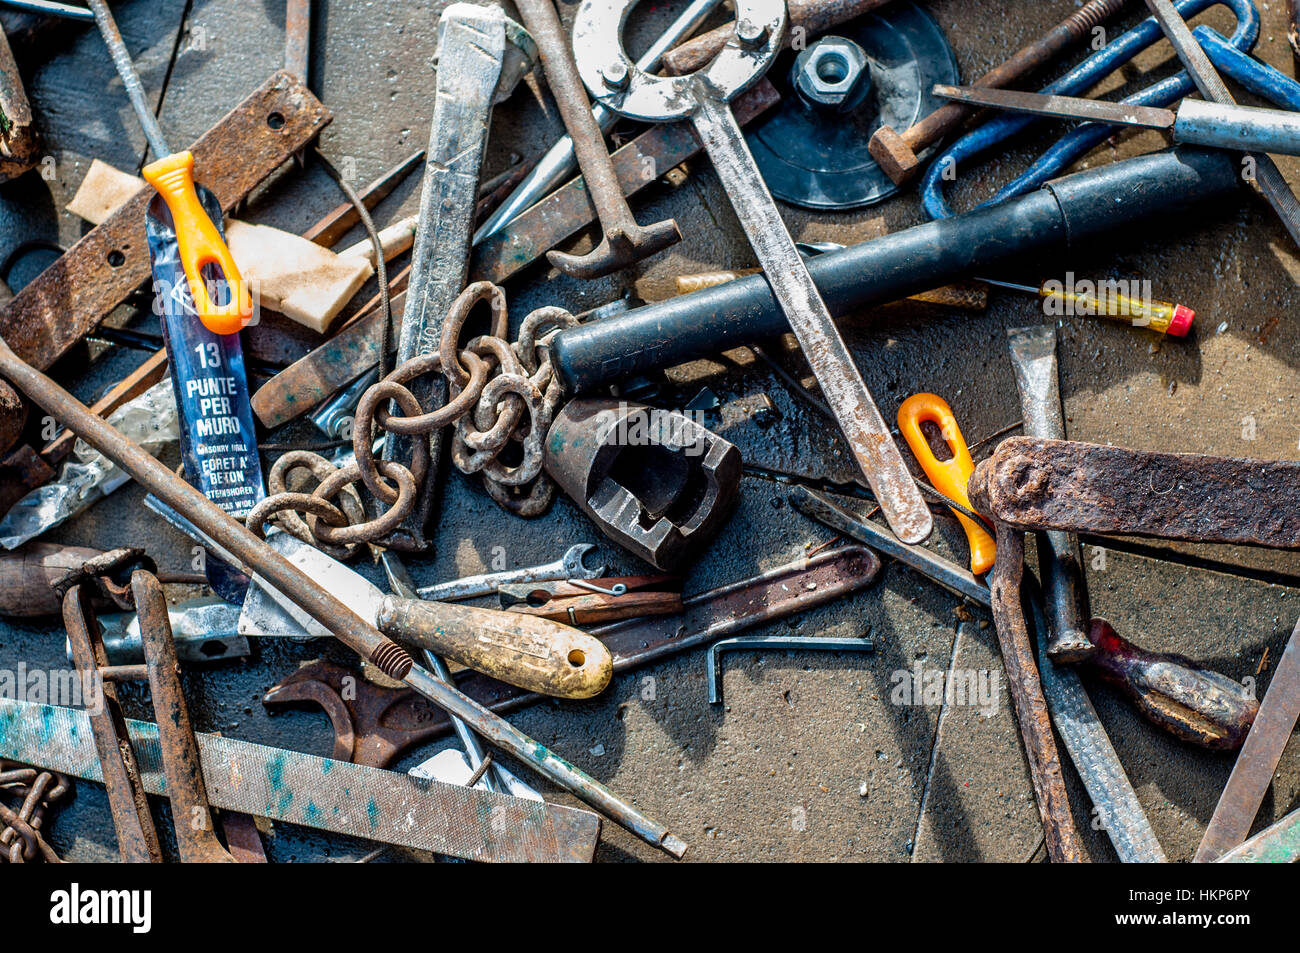 Old second-hand tools to sell on the street Stock Photo